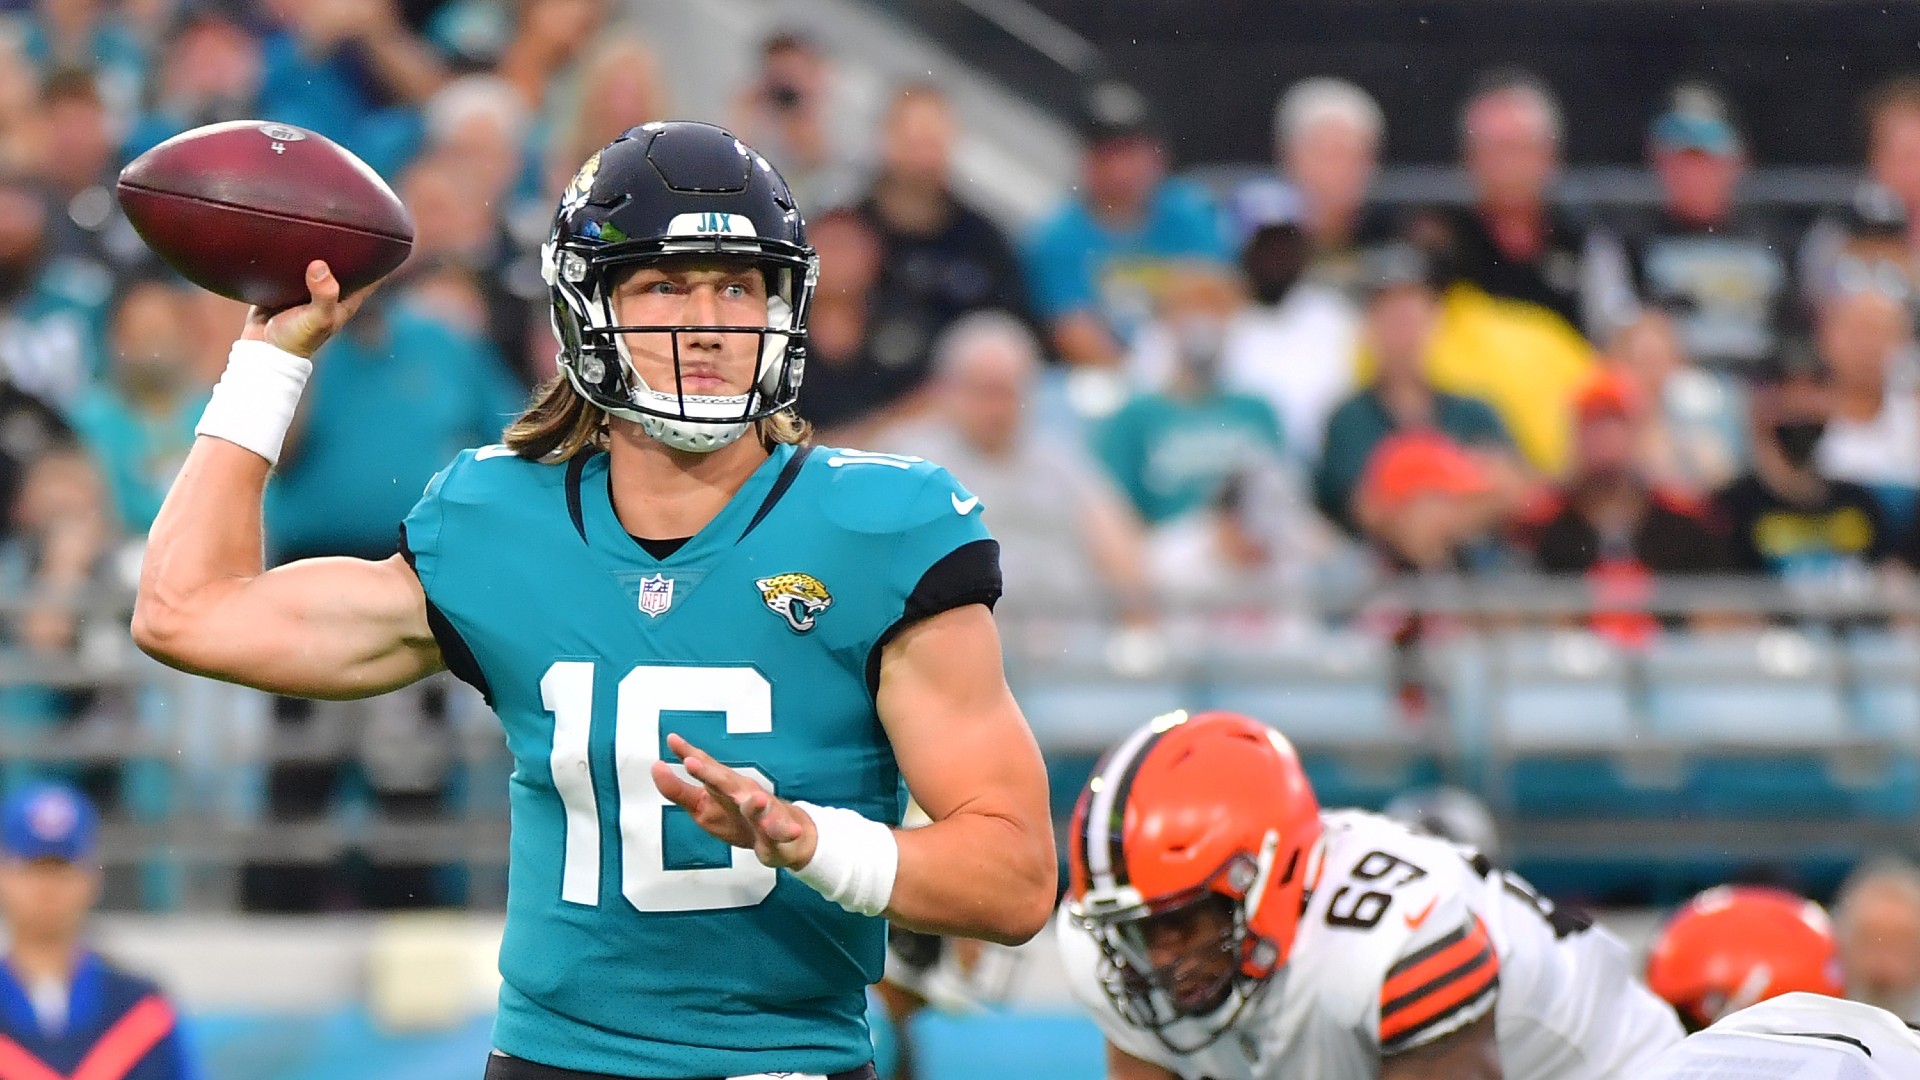 First overall pick Trevor Lawrence felt poised in his debut and Trey Lance provided a spectacular highlight on his NFL bow.